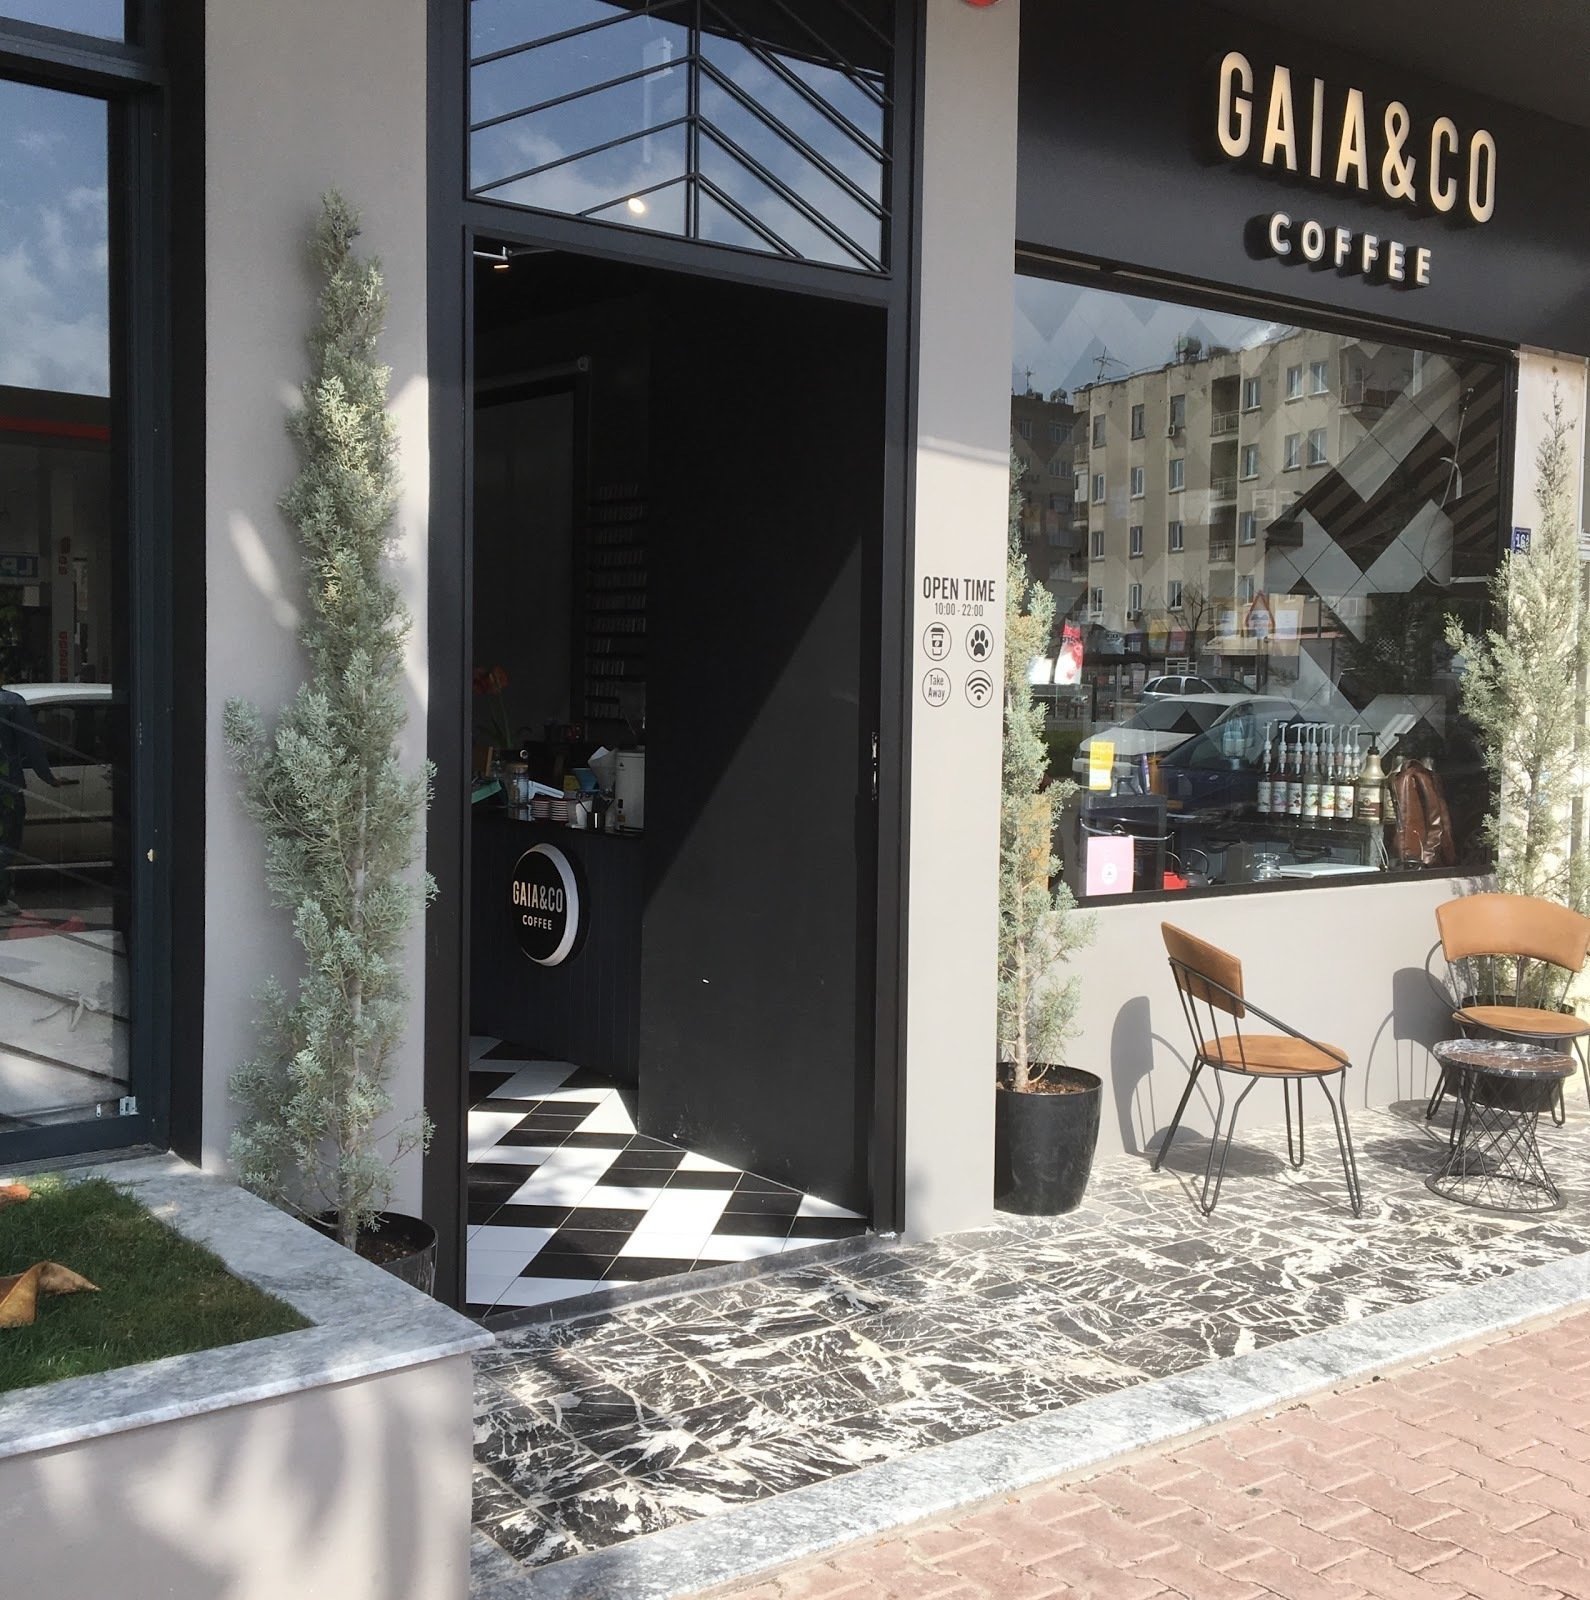 <span class="translation_missing" title="translation missing: en.meta.location_title, location_name: Gaia &amp; Co Coffee, city: Mersin">Location Title</span>